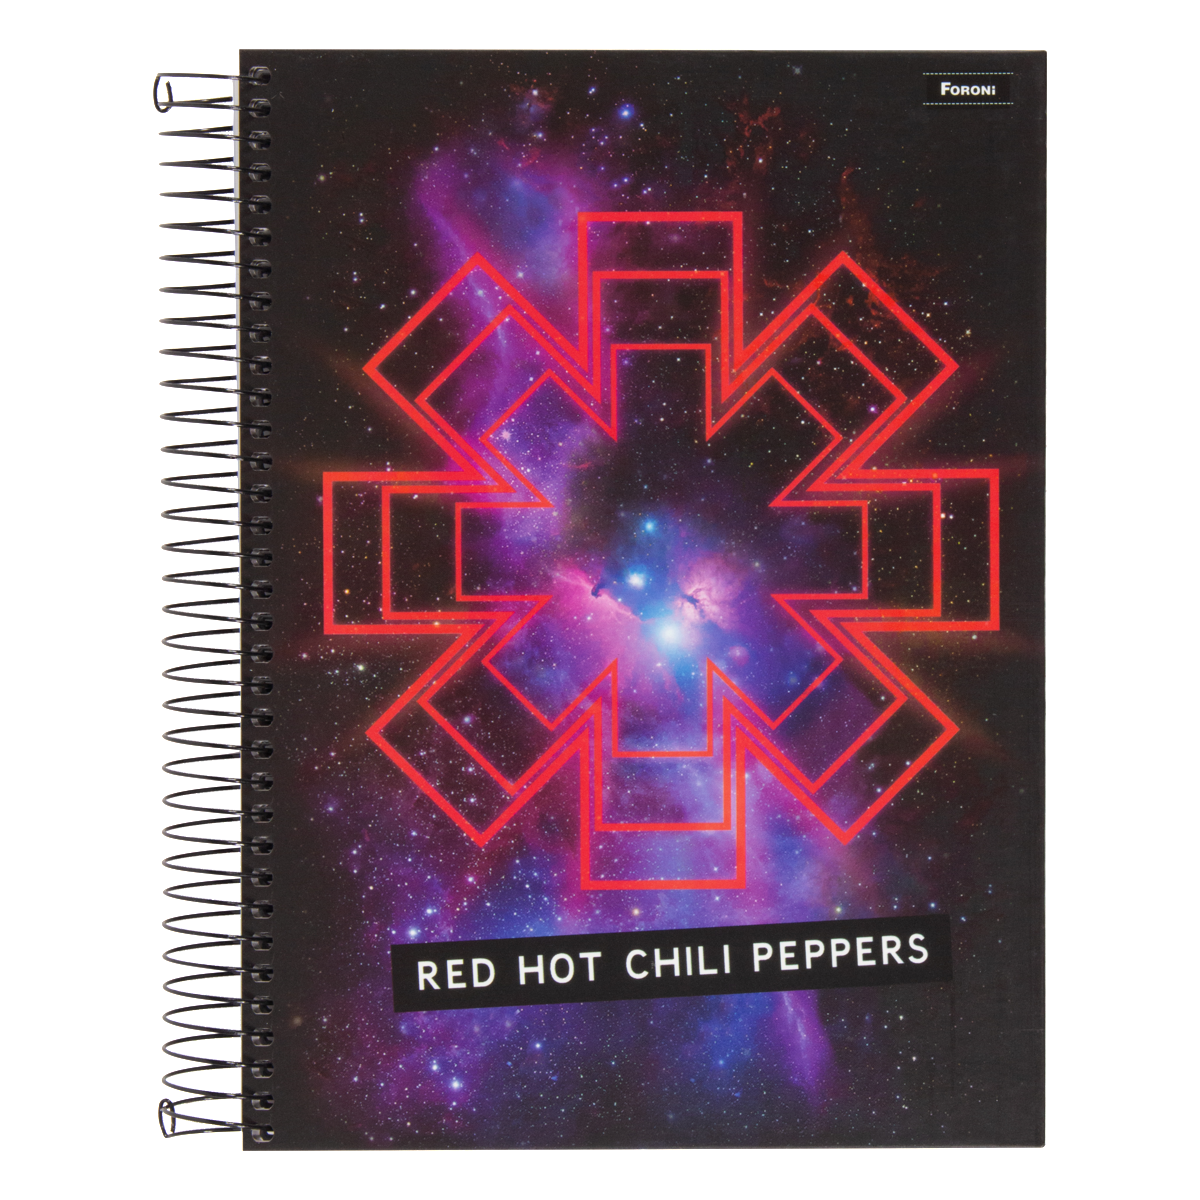 7899264389531 - CADERNO CAPA DURA ESPIRAL RED HOT CHILI PEPPERS FORONI 200MM X 275MM 200 FOLHAS